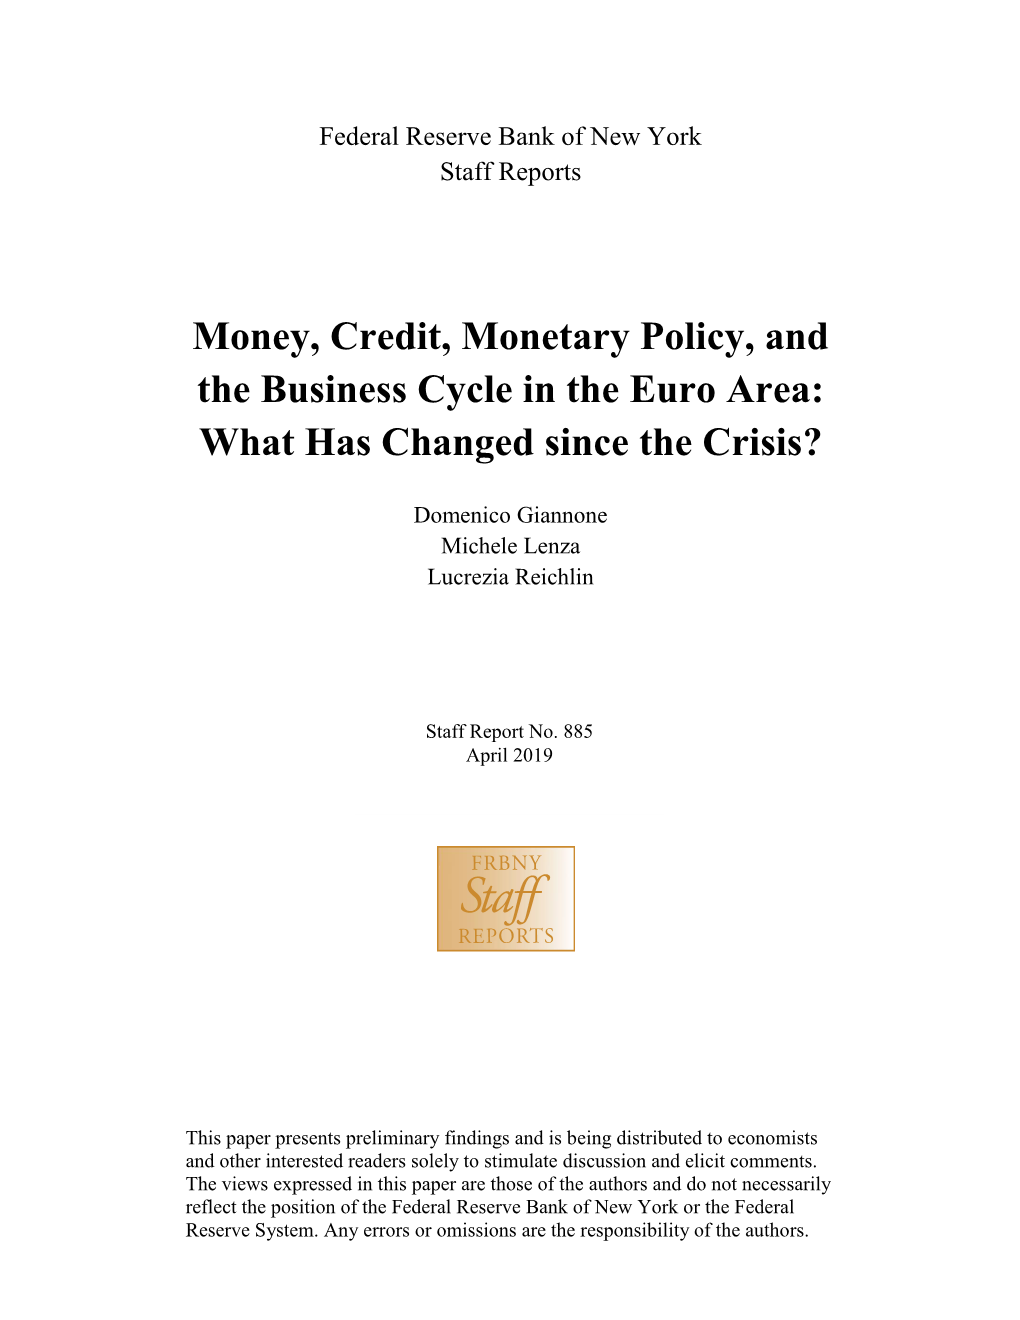 Money, Credit, Monetary Policy, and the Business Cycle in the Euro Area: What Has Changed Since the Crisis?